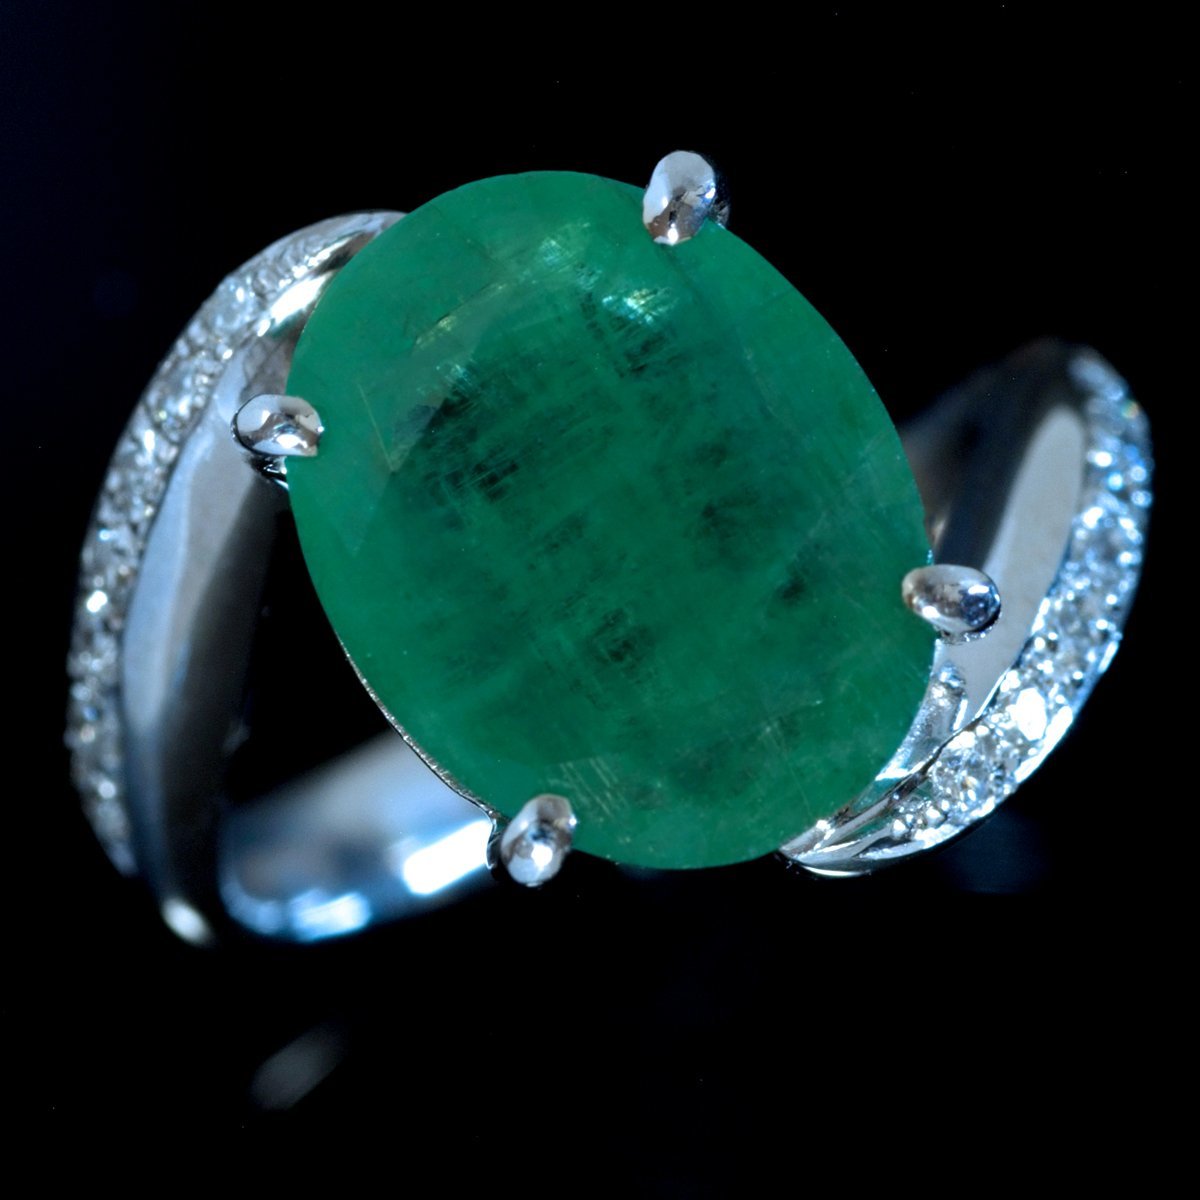 F3453 rare Russia production beautiful large grain emerald 4.81ct natural rarity D0.24ct top class Pt900 purity Celeb liti ring #11 number weight 9.3g length width 14.7mm